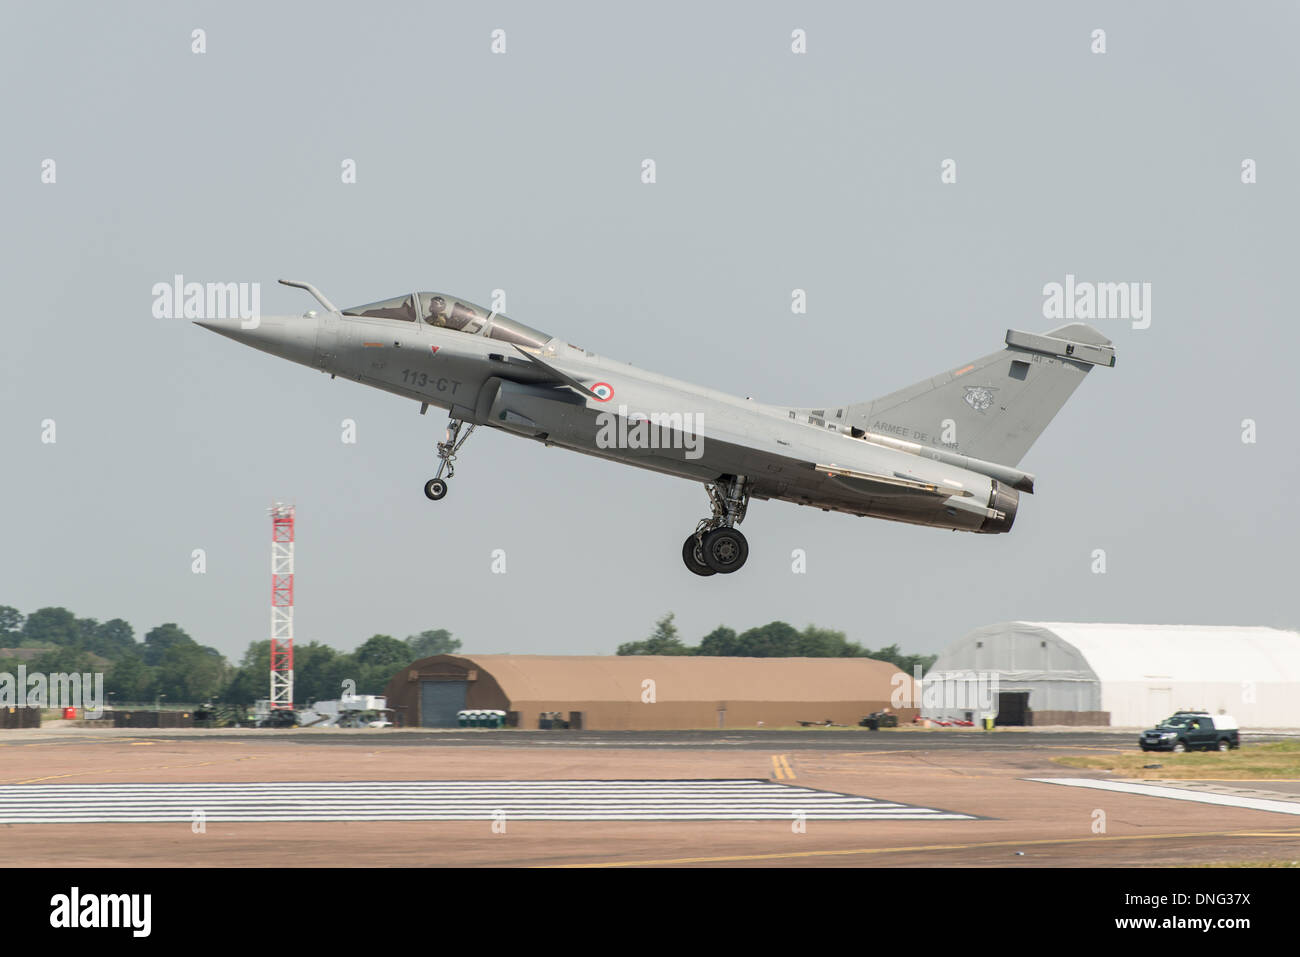 Dassault Aviation Rafale Multi Role Fighter Aircraft of the French Air Force, or Armee De L'Air, lands at Fairford for the RIAT Stock Photo